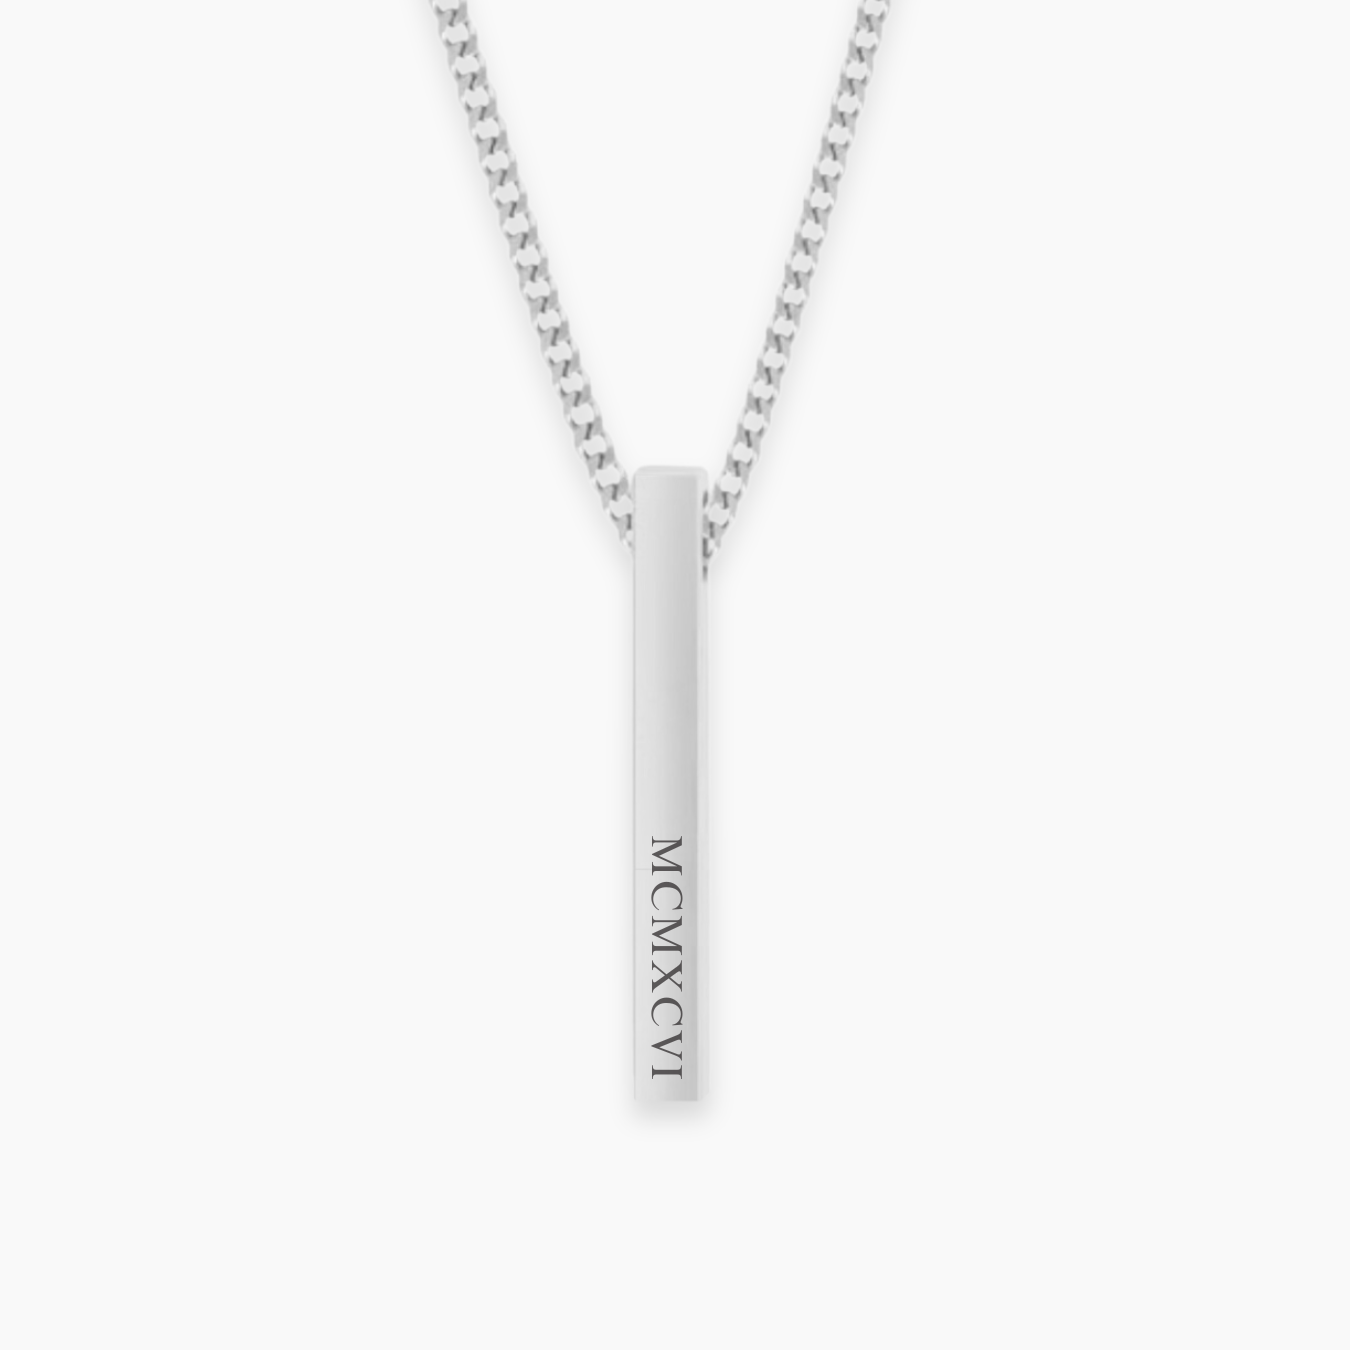 PRISM Personalizable Necklace | Custom Text